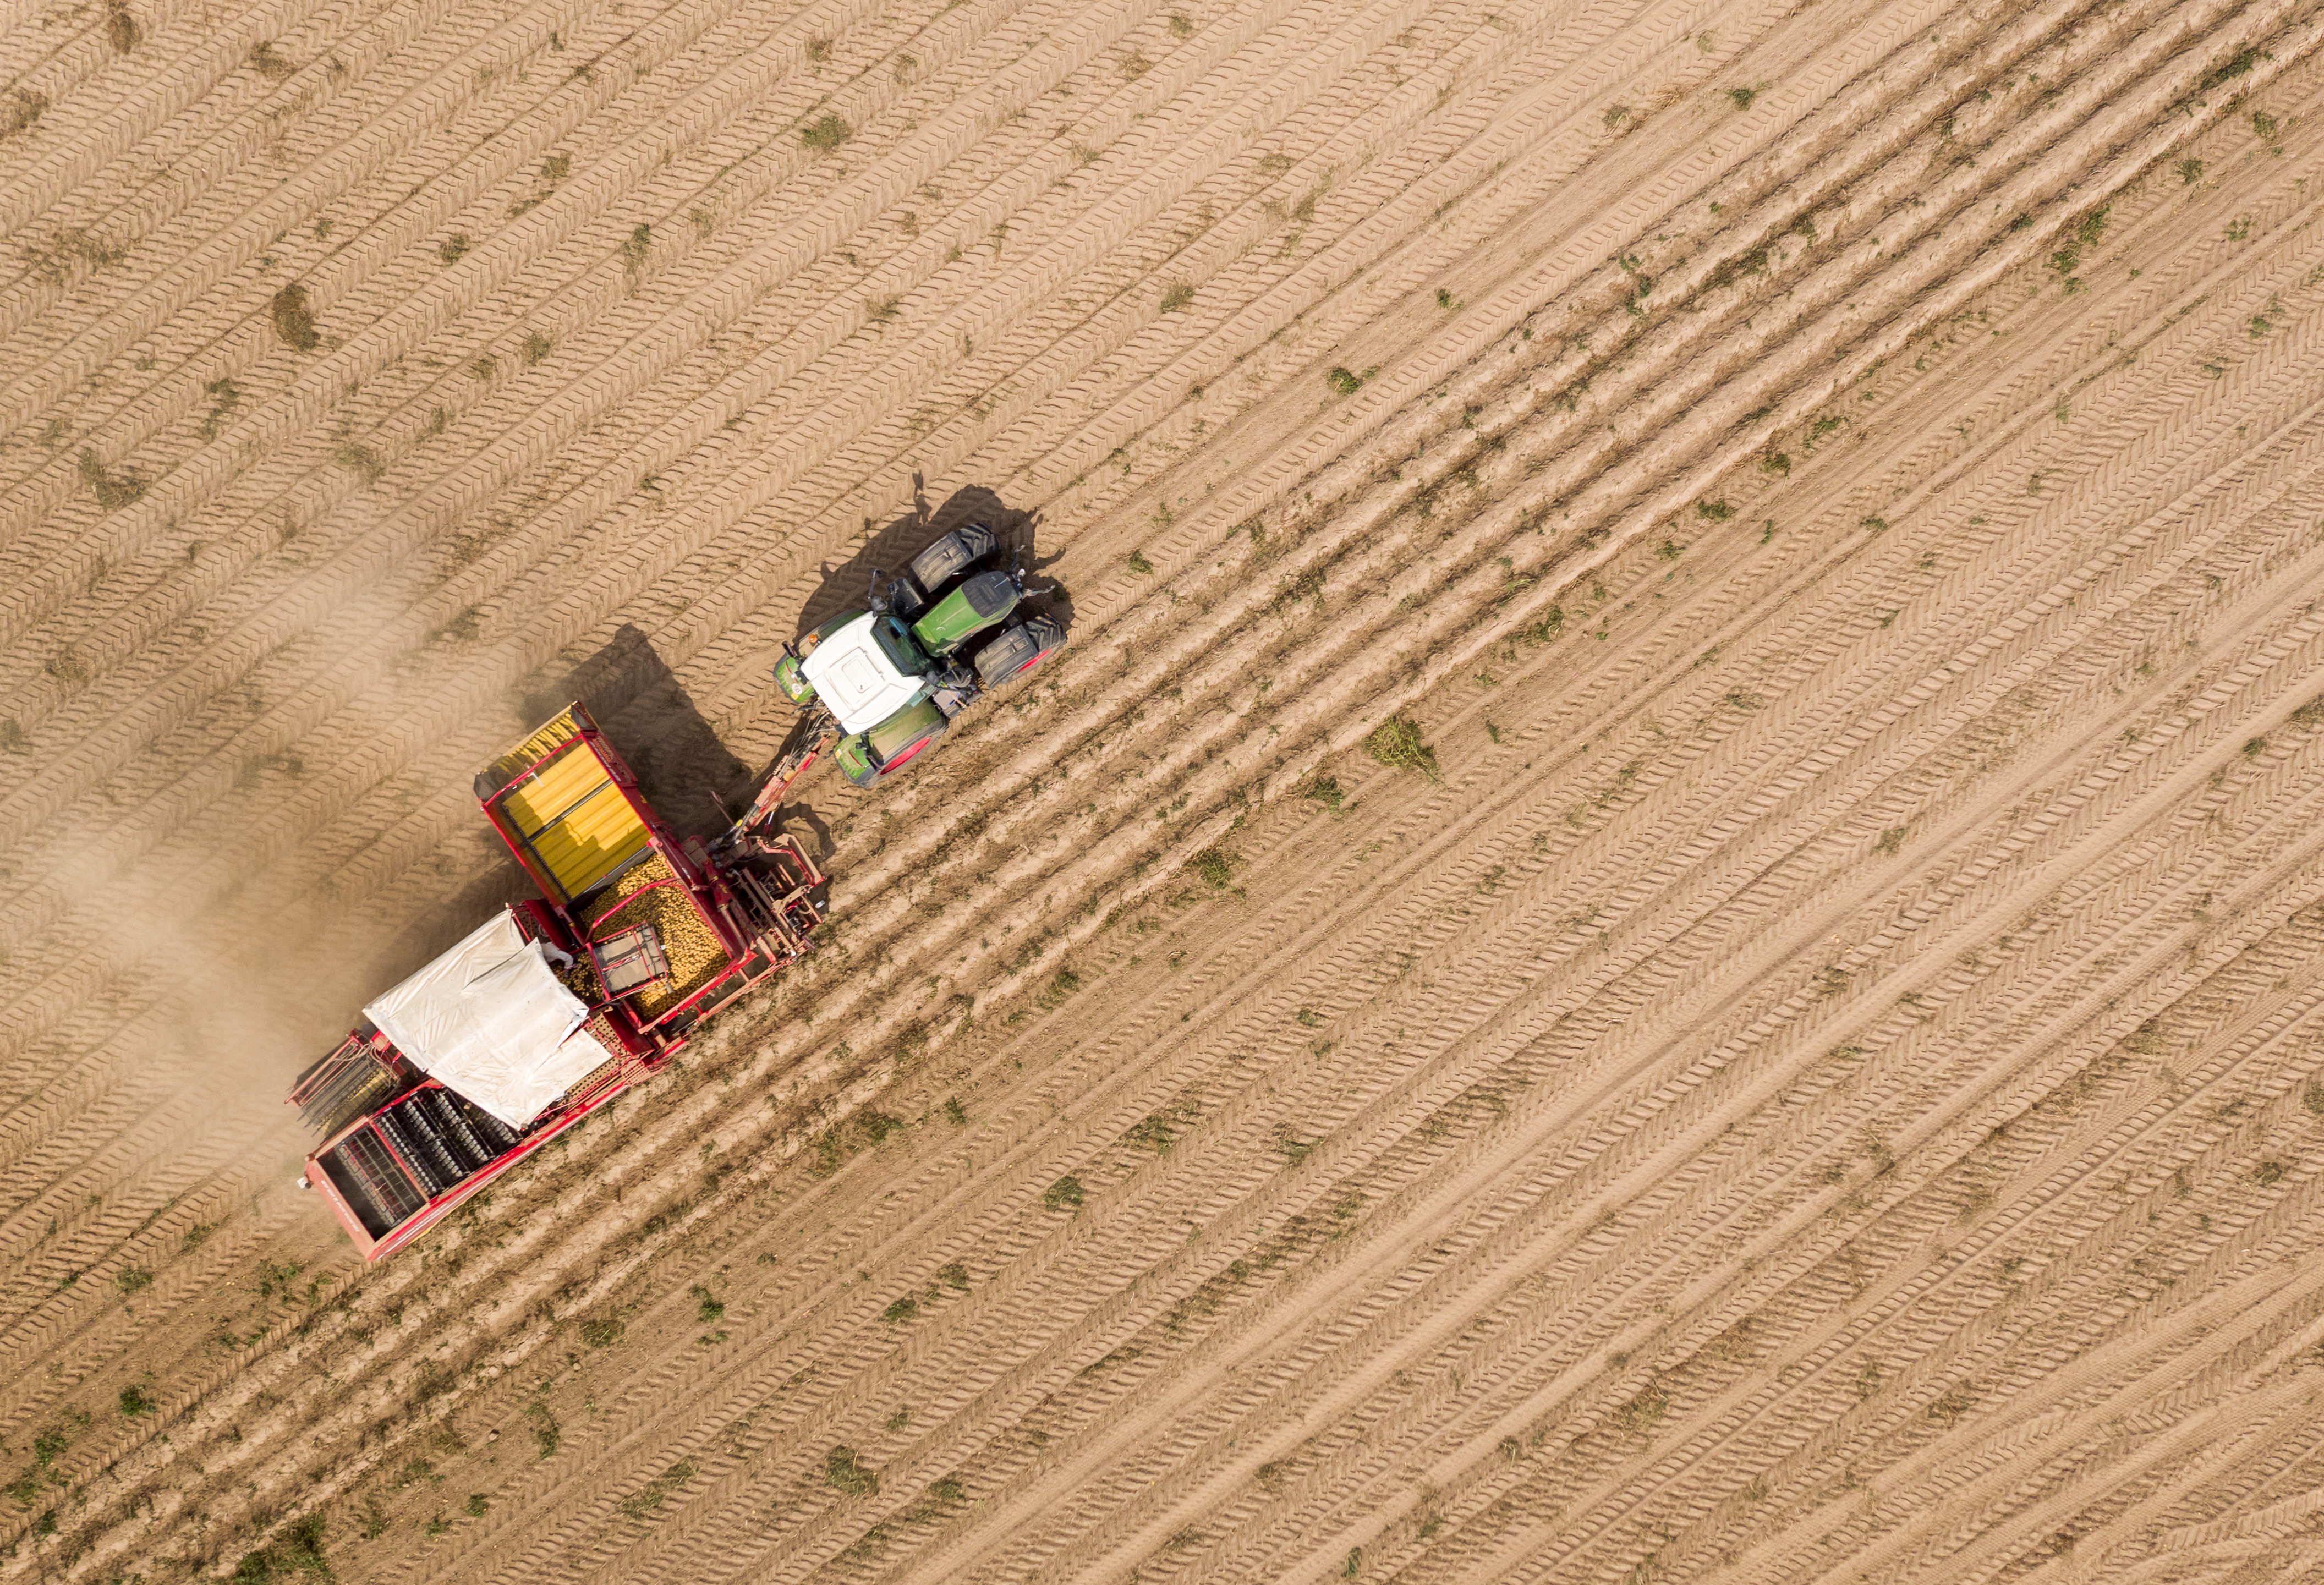 An overhead shot of a dusty potato field being harvested by machine.